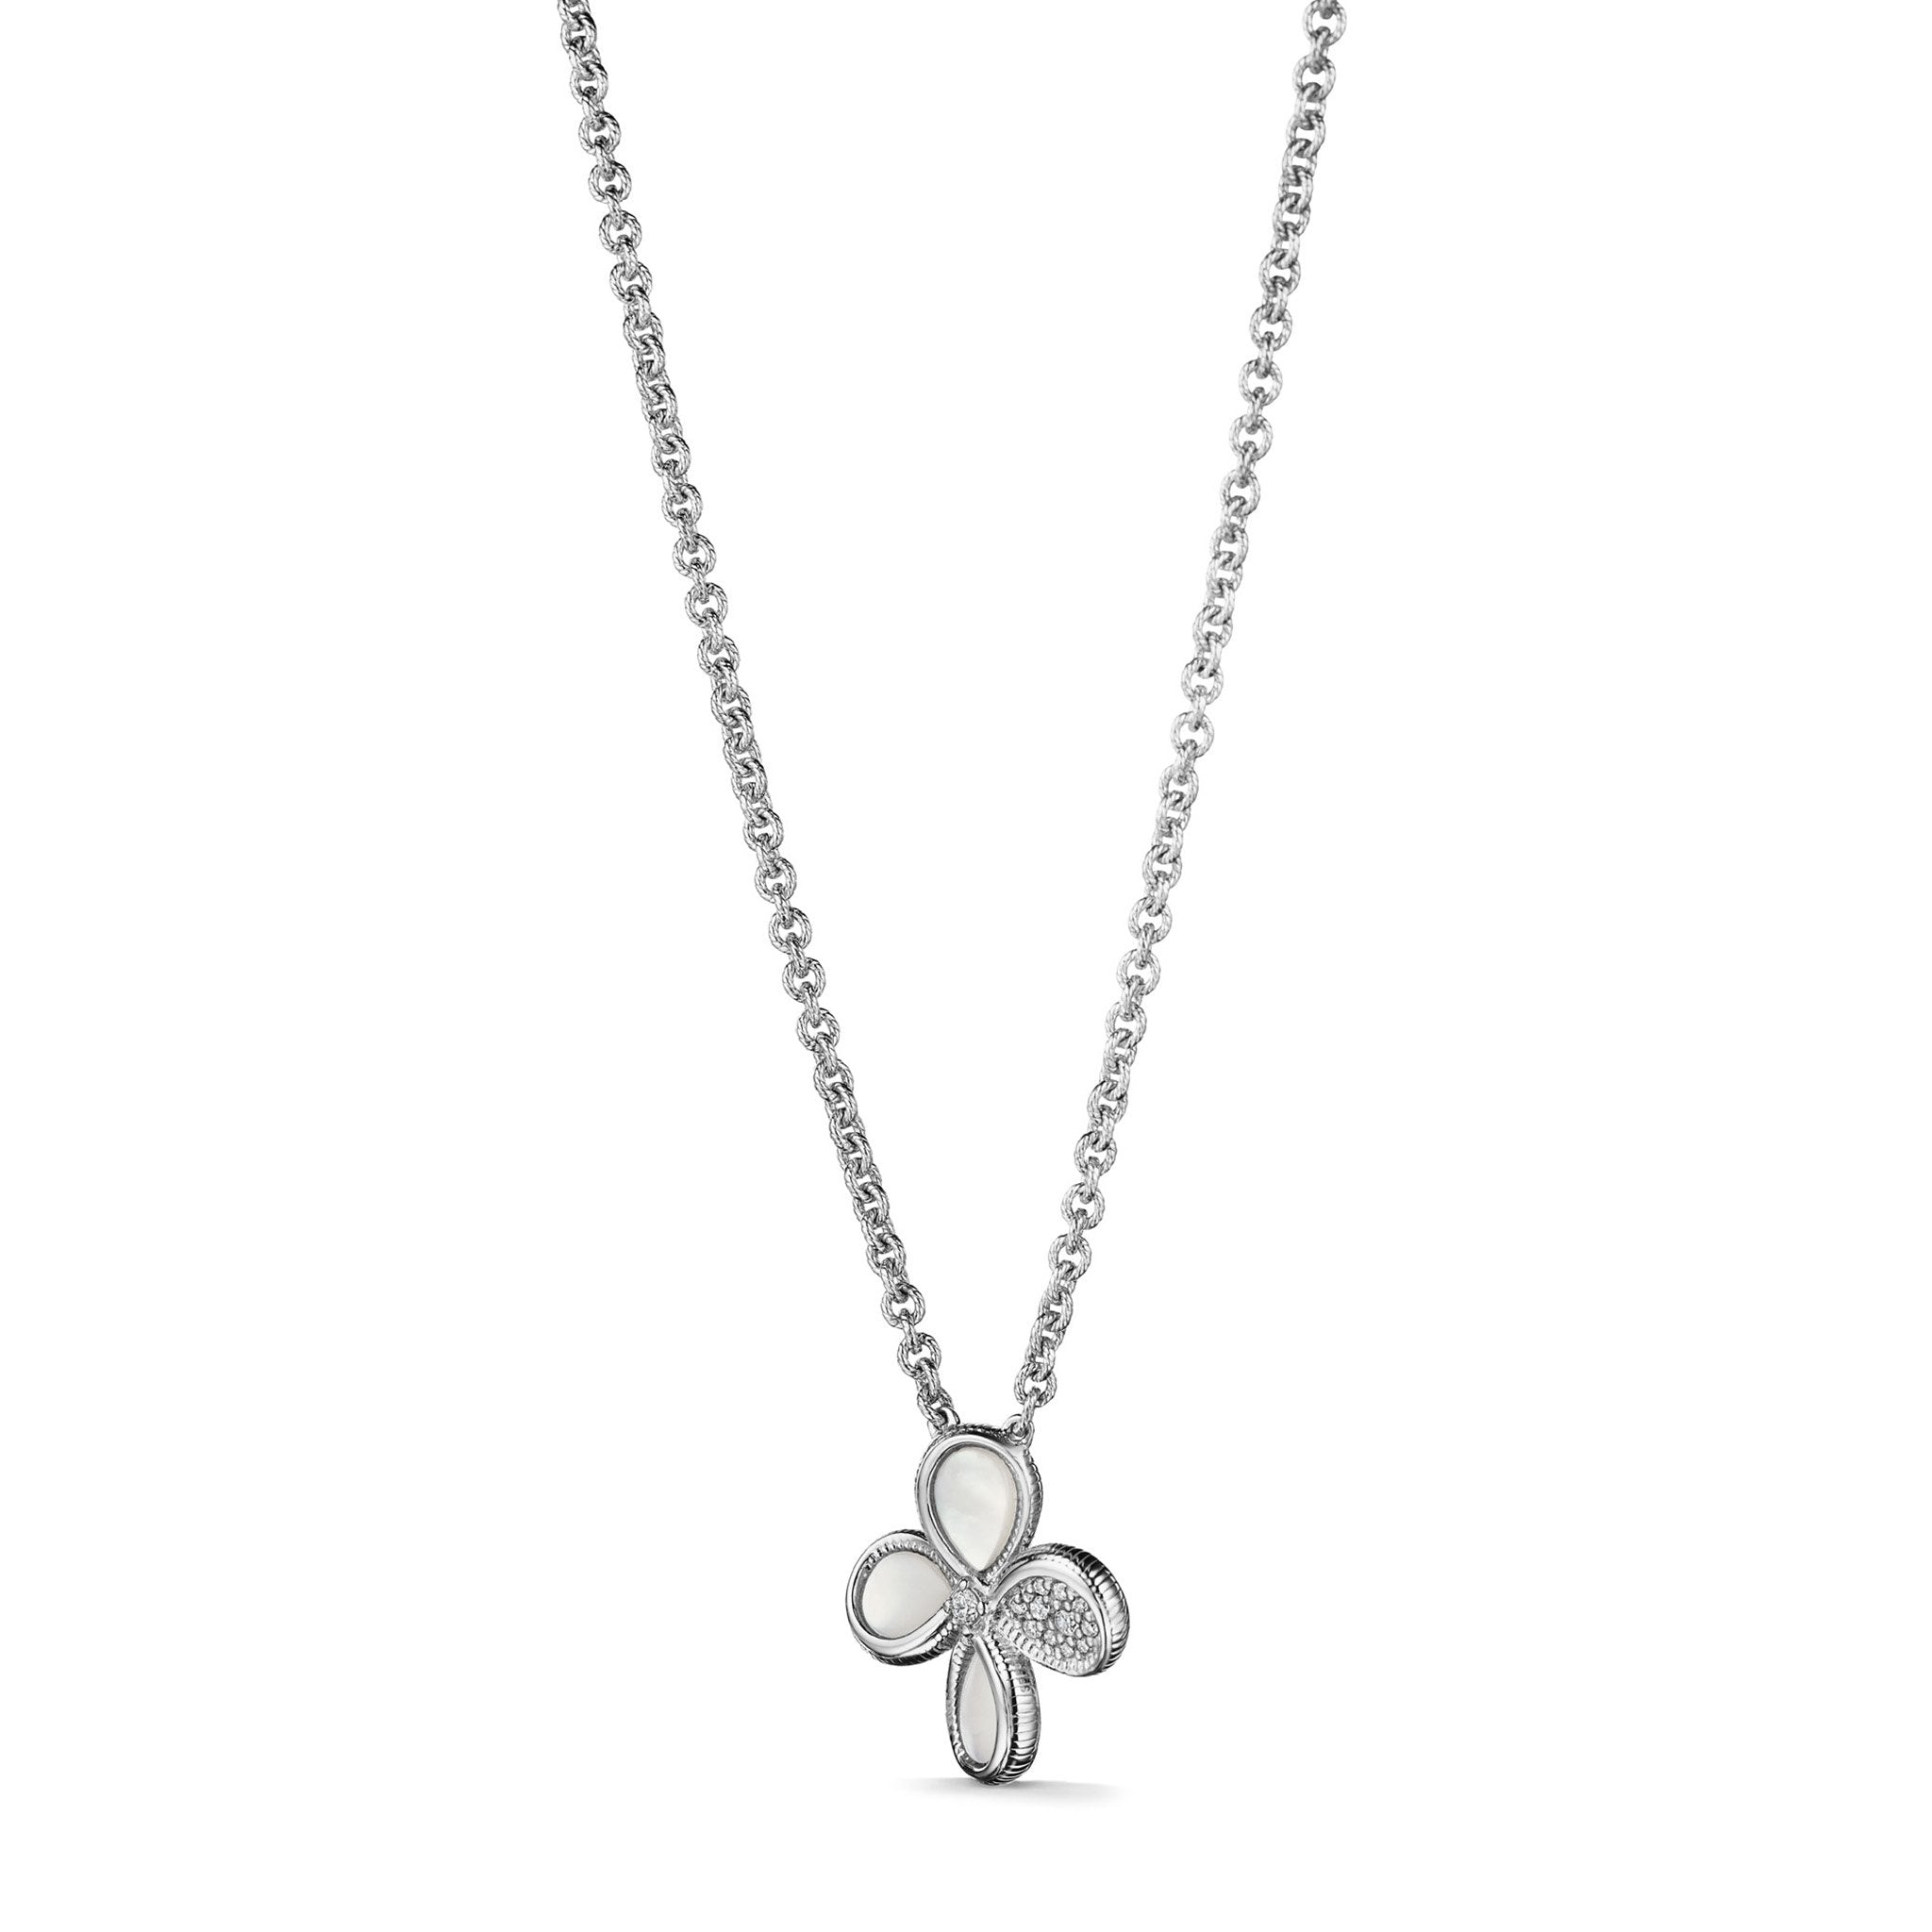 Jardin Flower Pendant Necklace with Mother of Pearl and Diamonds